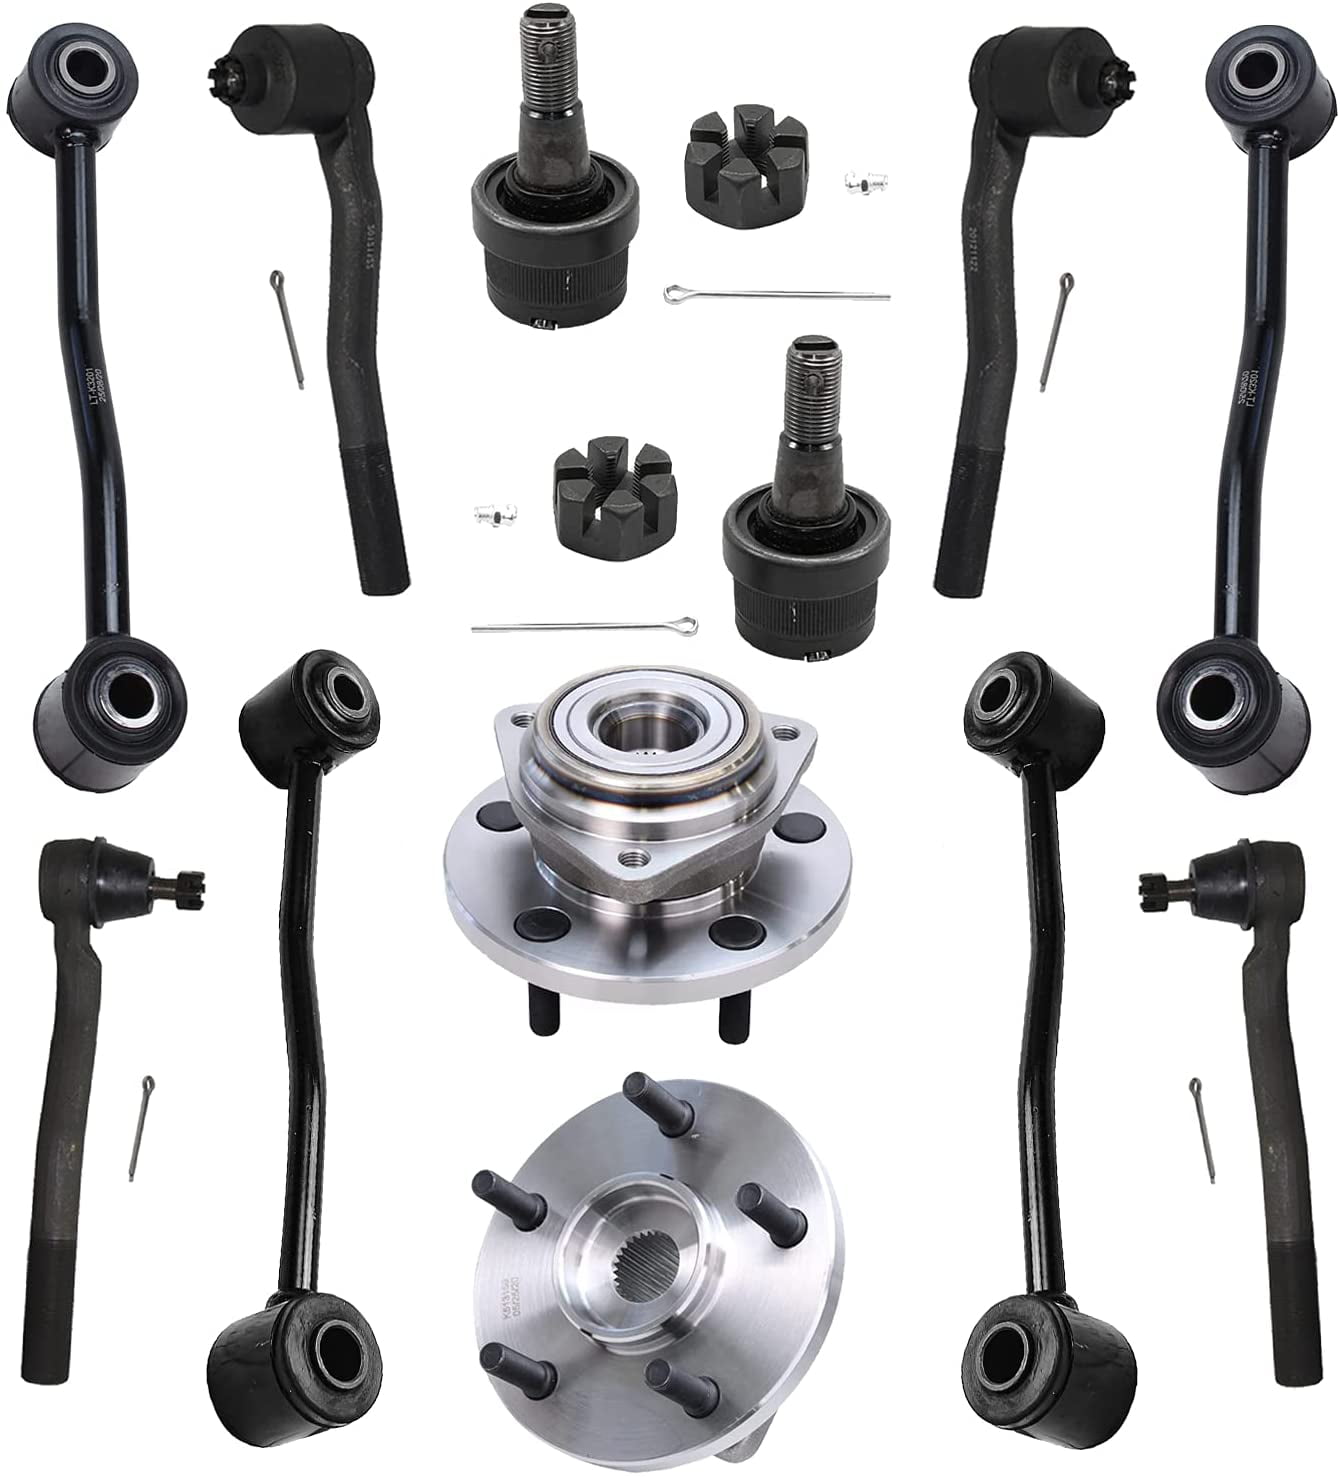 Steering Outer Tie Rod Suspension Kit for 1999 2000 2001 2002 2003 2004 Jeep Grand Cherokee Front and Rear Sway Bar Link 12PC Front Upper Lower Ball Joint Detroit Axle 